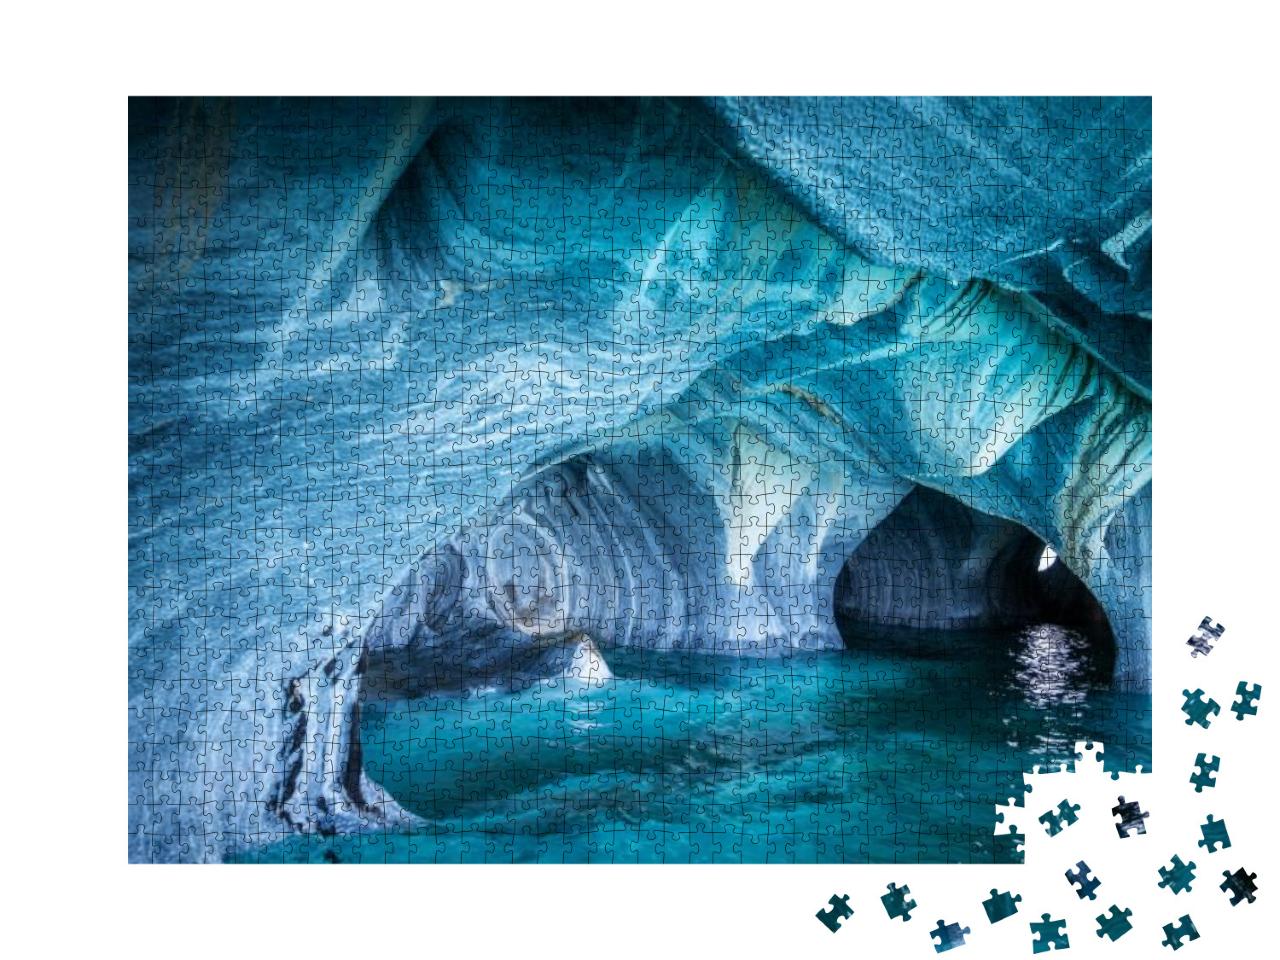 The Marble Caves Spanish Cuevas De Marmol Are a Series of... Jigsaw Puzzle with 1000 pieces